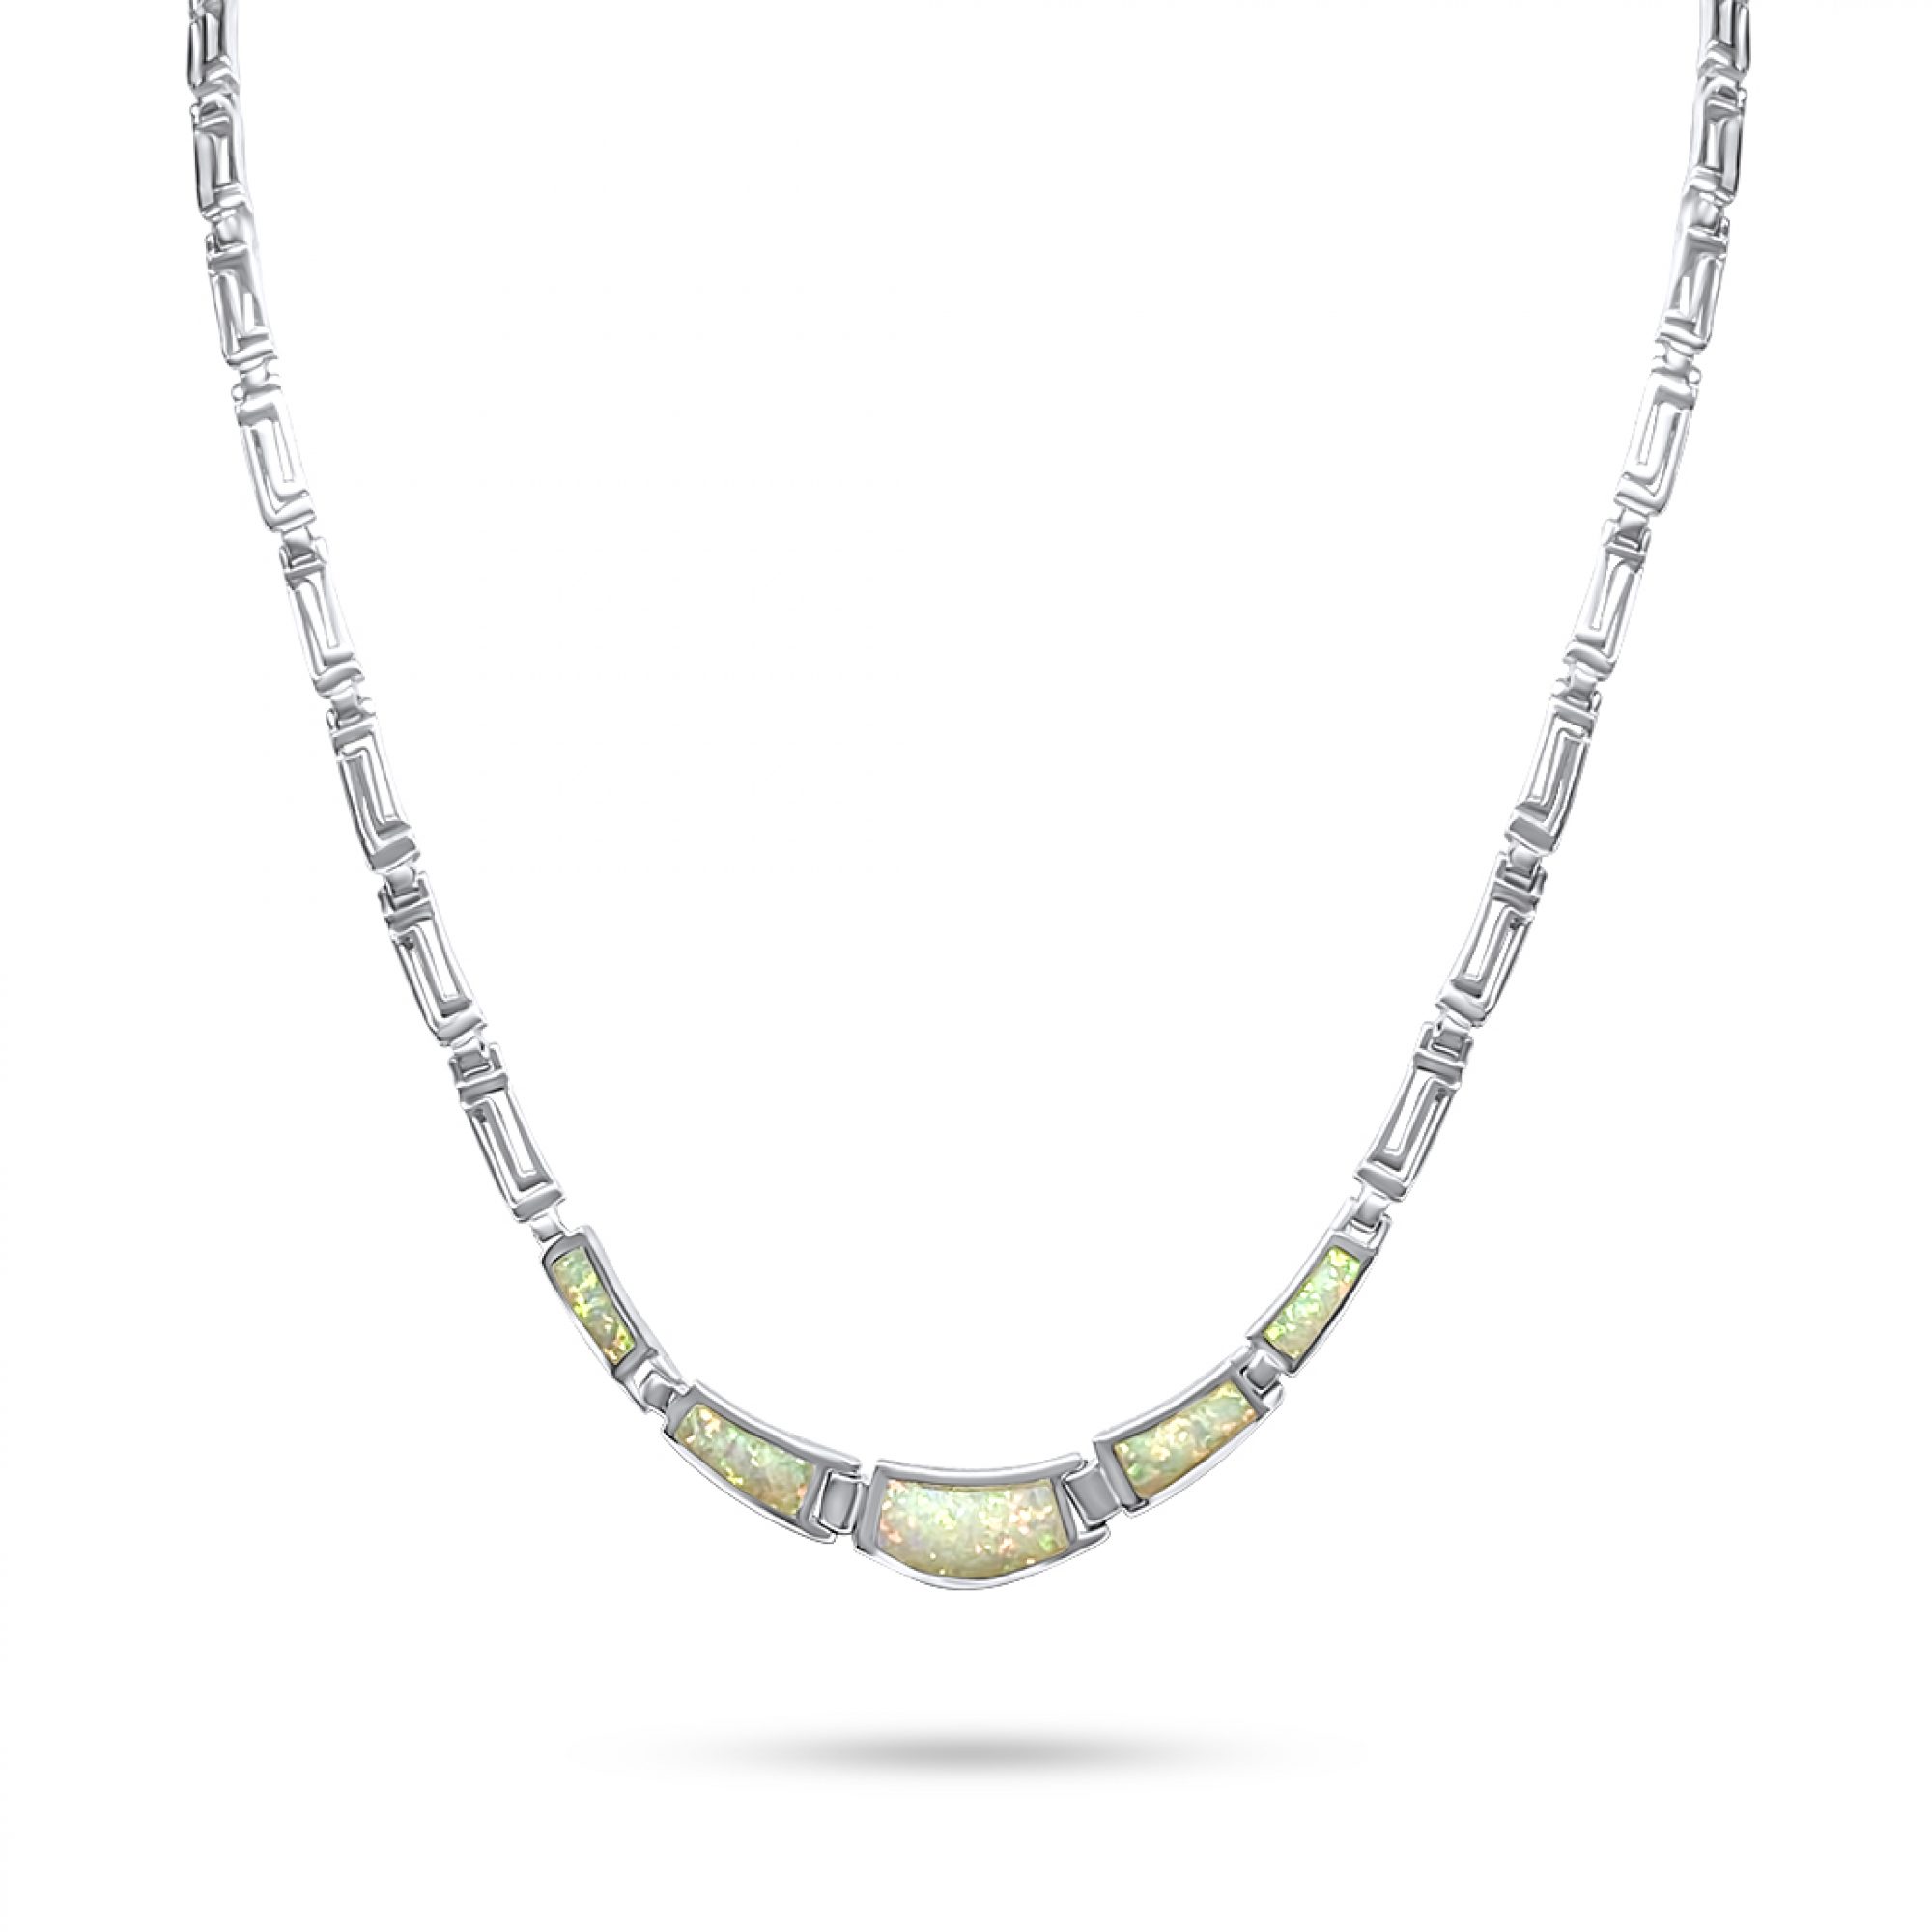 White opal necklace with meander